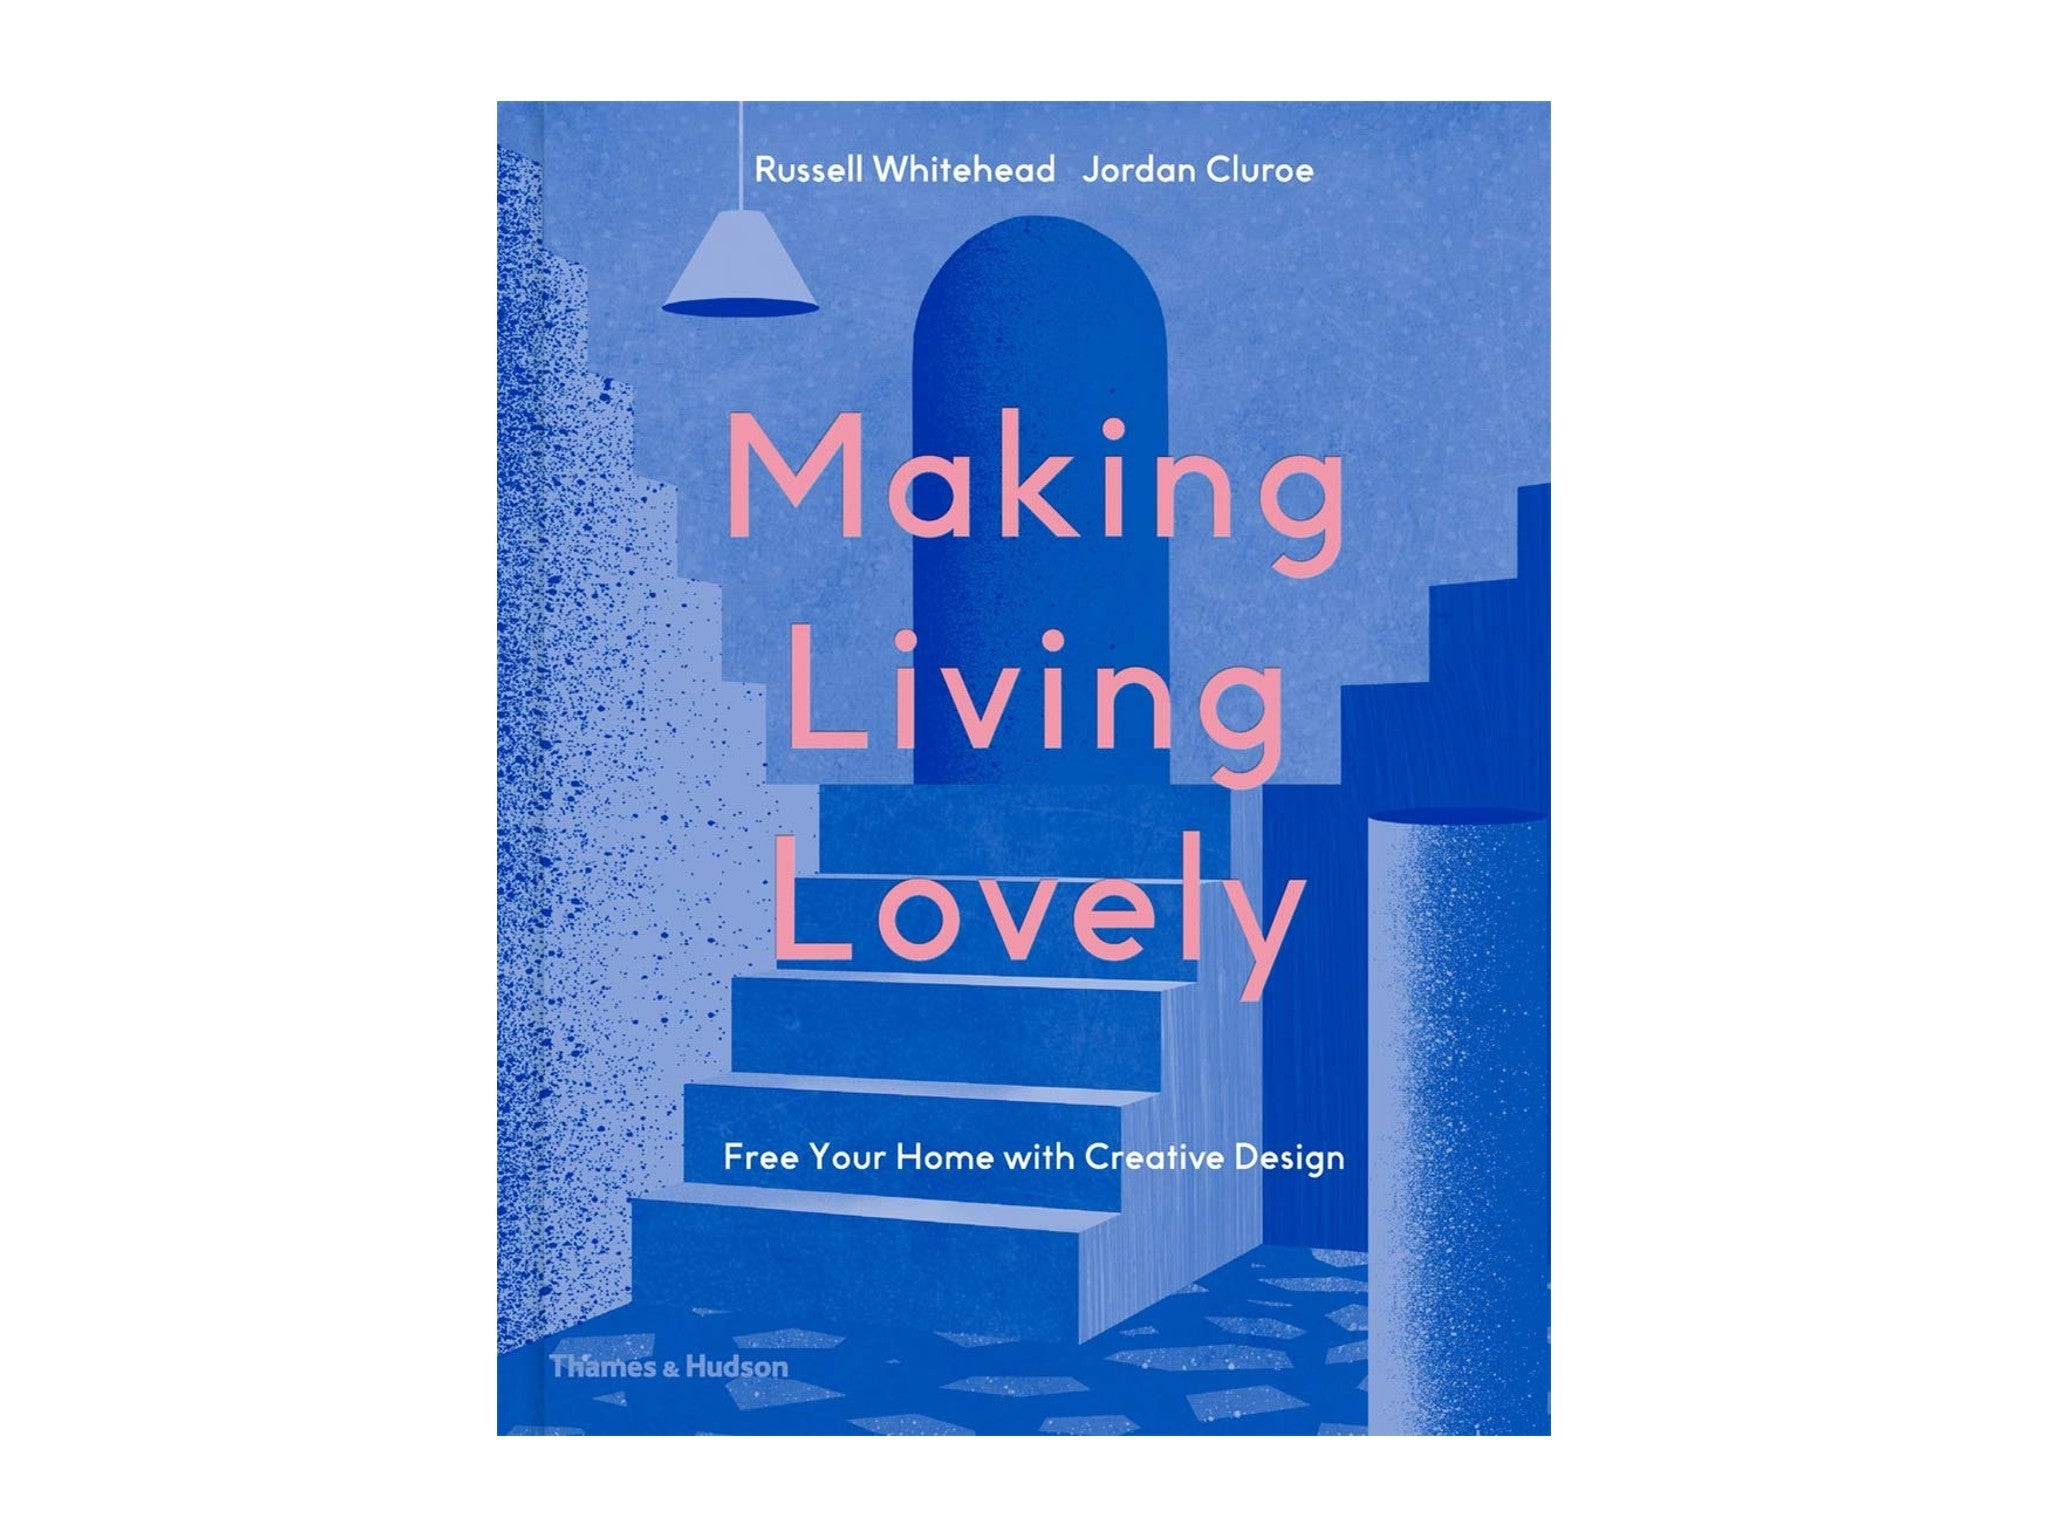 ‘Making Living Lovely’ by Russell Whitehead and Jordan Cluroe indybest.jpg